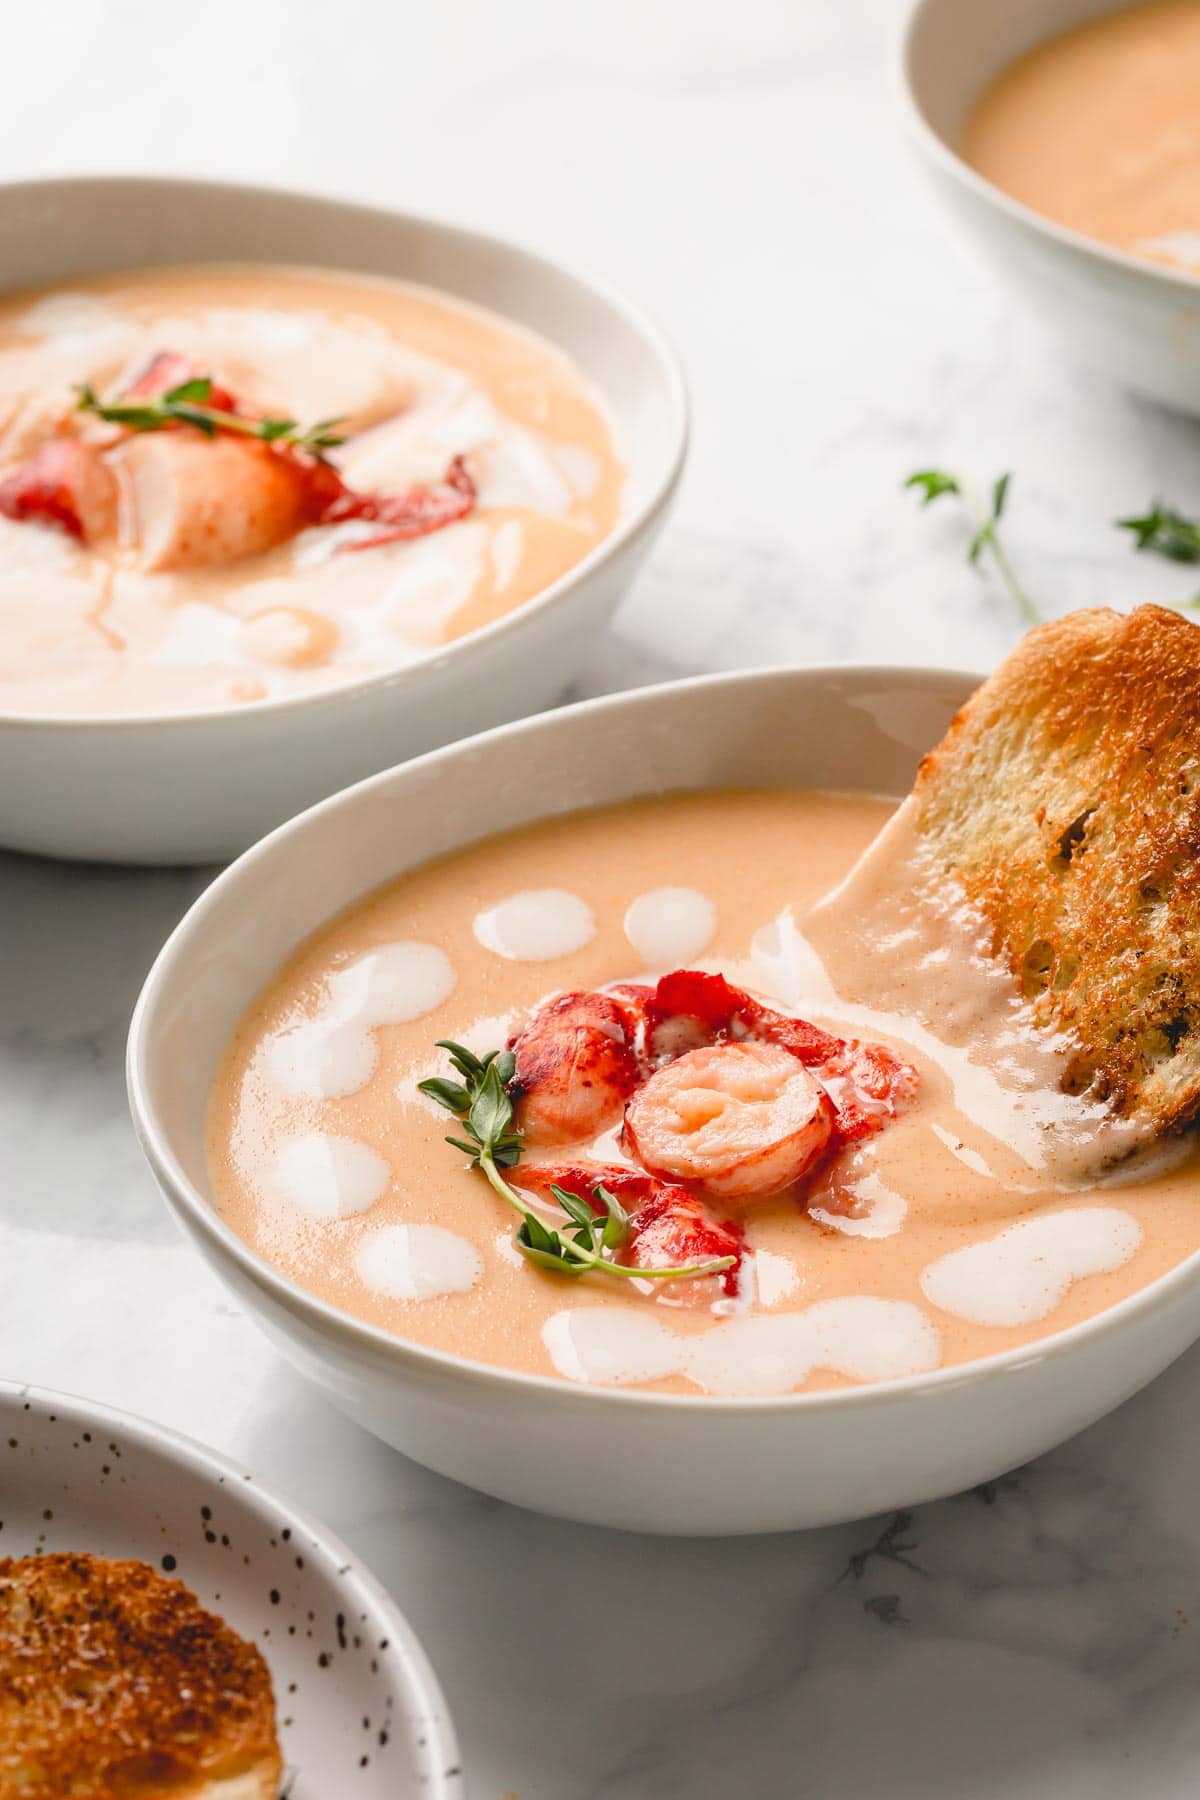 Lobster Bisque Recipe - Insanely Good